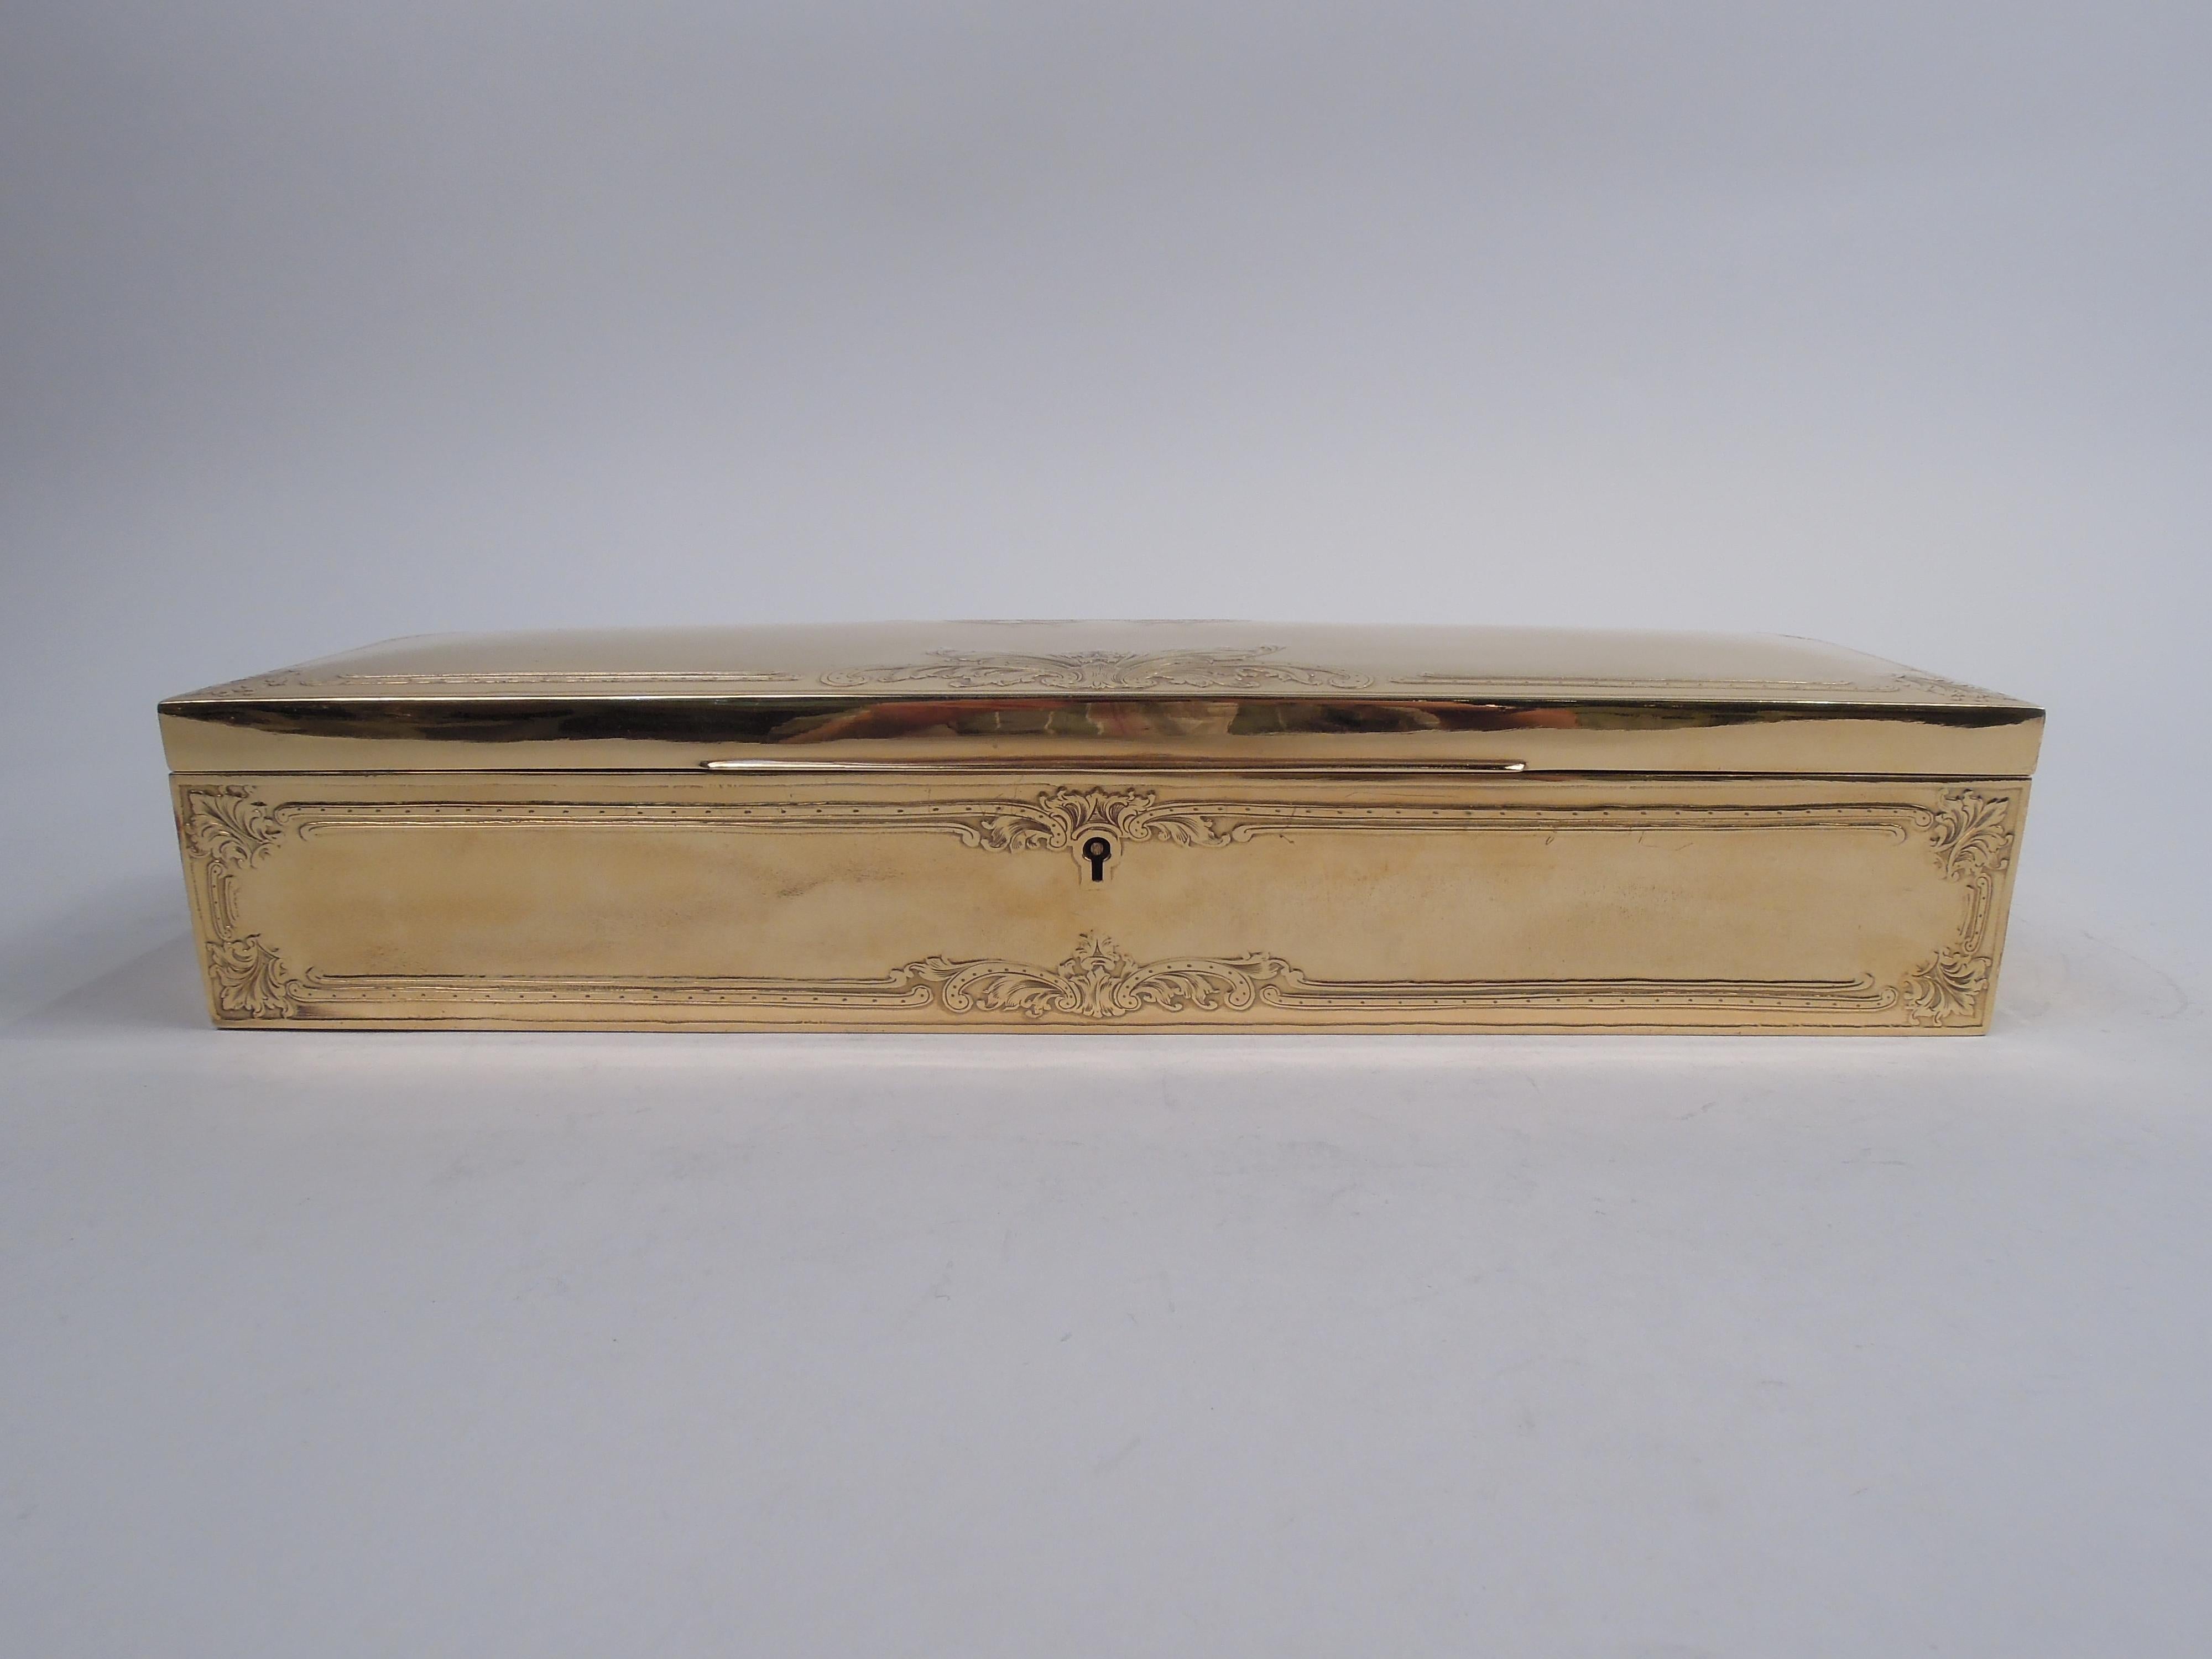 Edwardian Classical gilt sterling silver glove box. Made by Ahrendt & Kautzman in Newark, ca 1910. Rectangular with straight sides and sharp corners. Cover hinged with tapering tab and gently curved top. Low-relief ornament in form of rectilinear